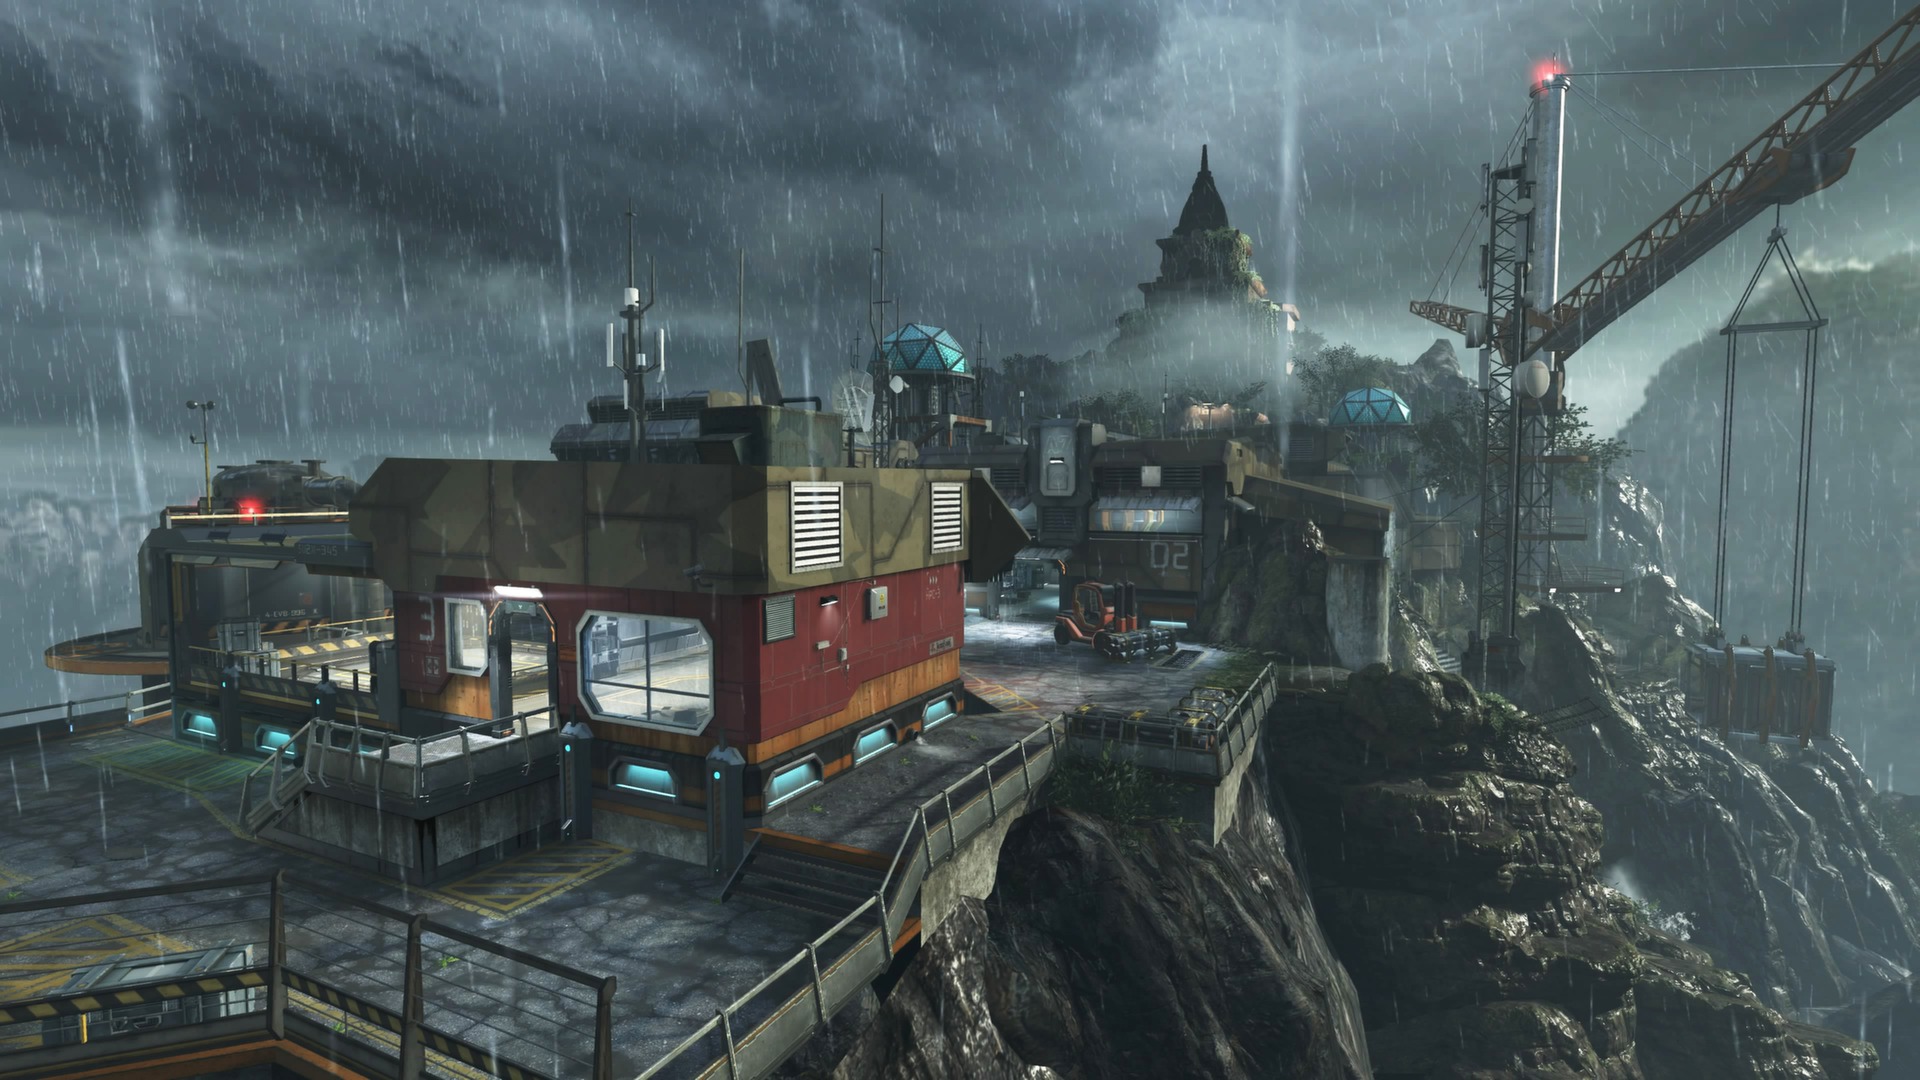 FULL Black Ops 2 REMASTERD Zombies MAPS REVEAL.. 😵 (Call of Duty